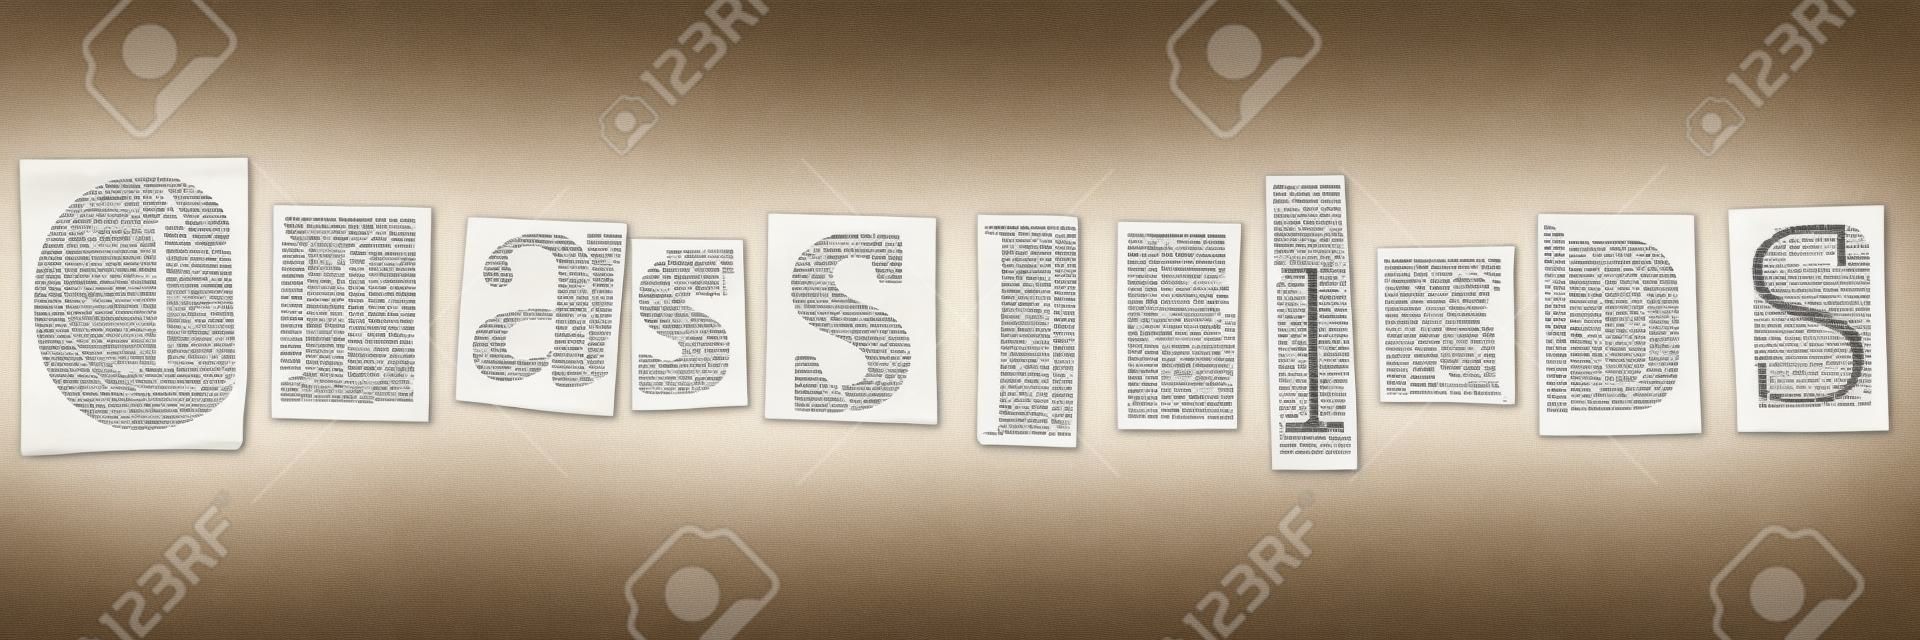 Classifieds - words composed from isolated, cutout newspaper letters.